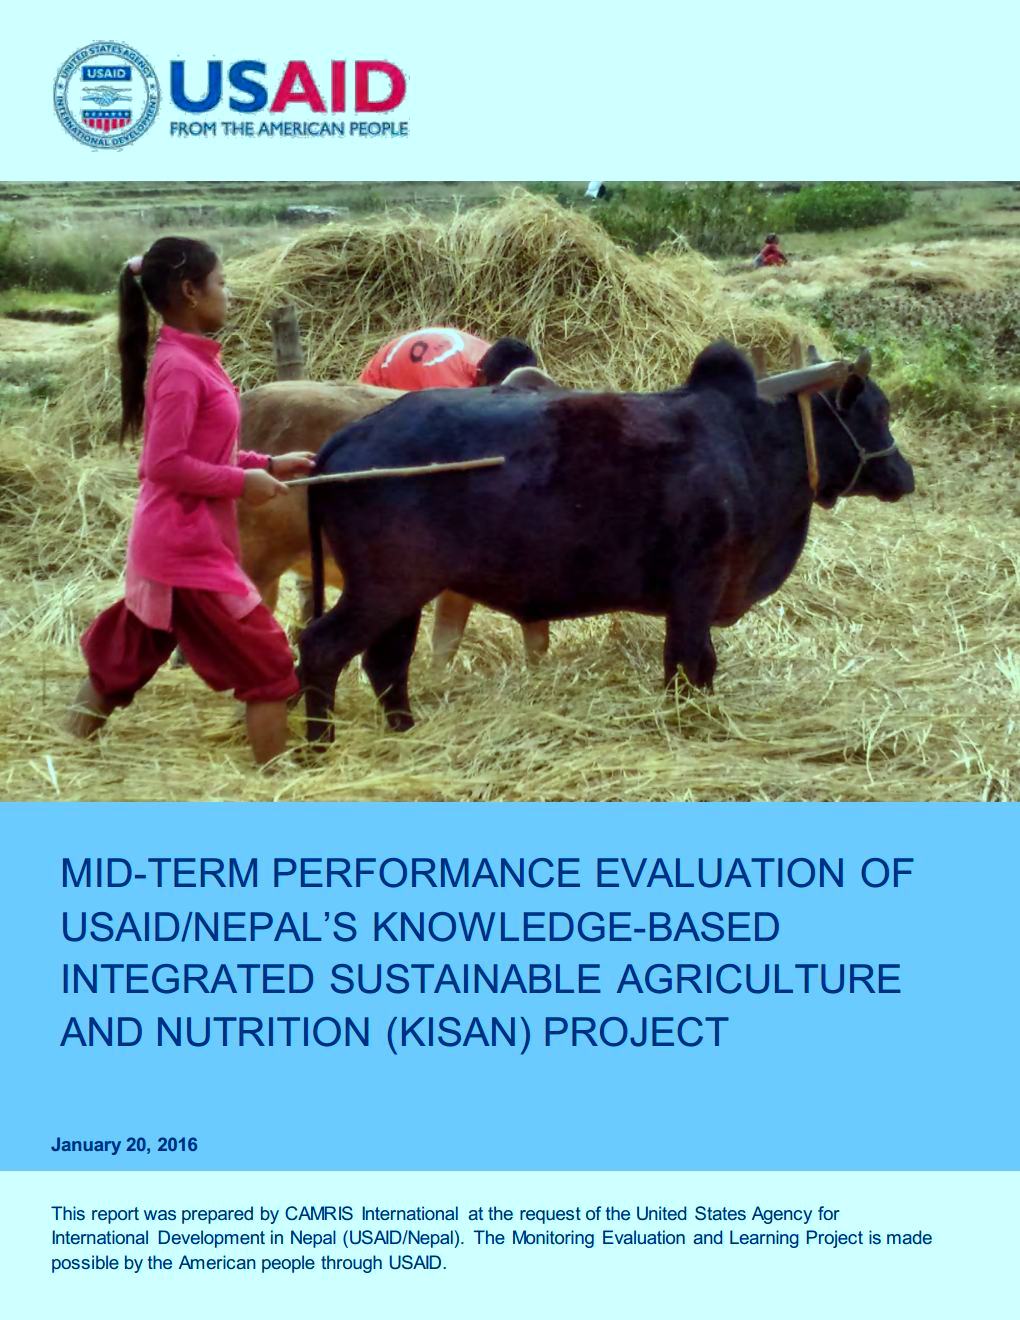 Mid-Term Performance Evaluation of Knowledge-Based Integrated Sustainable  Agriculture and Nutrition (KISAN) Project - New ERA